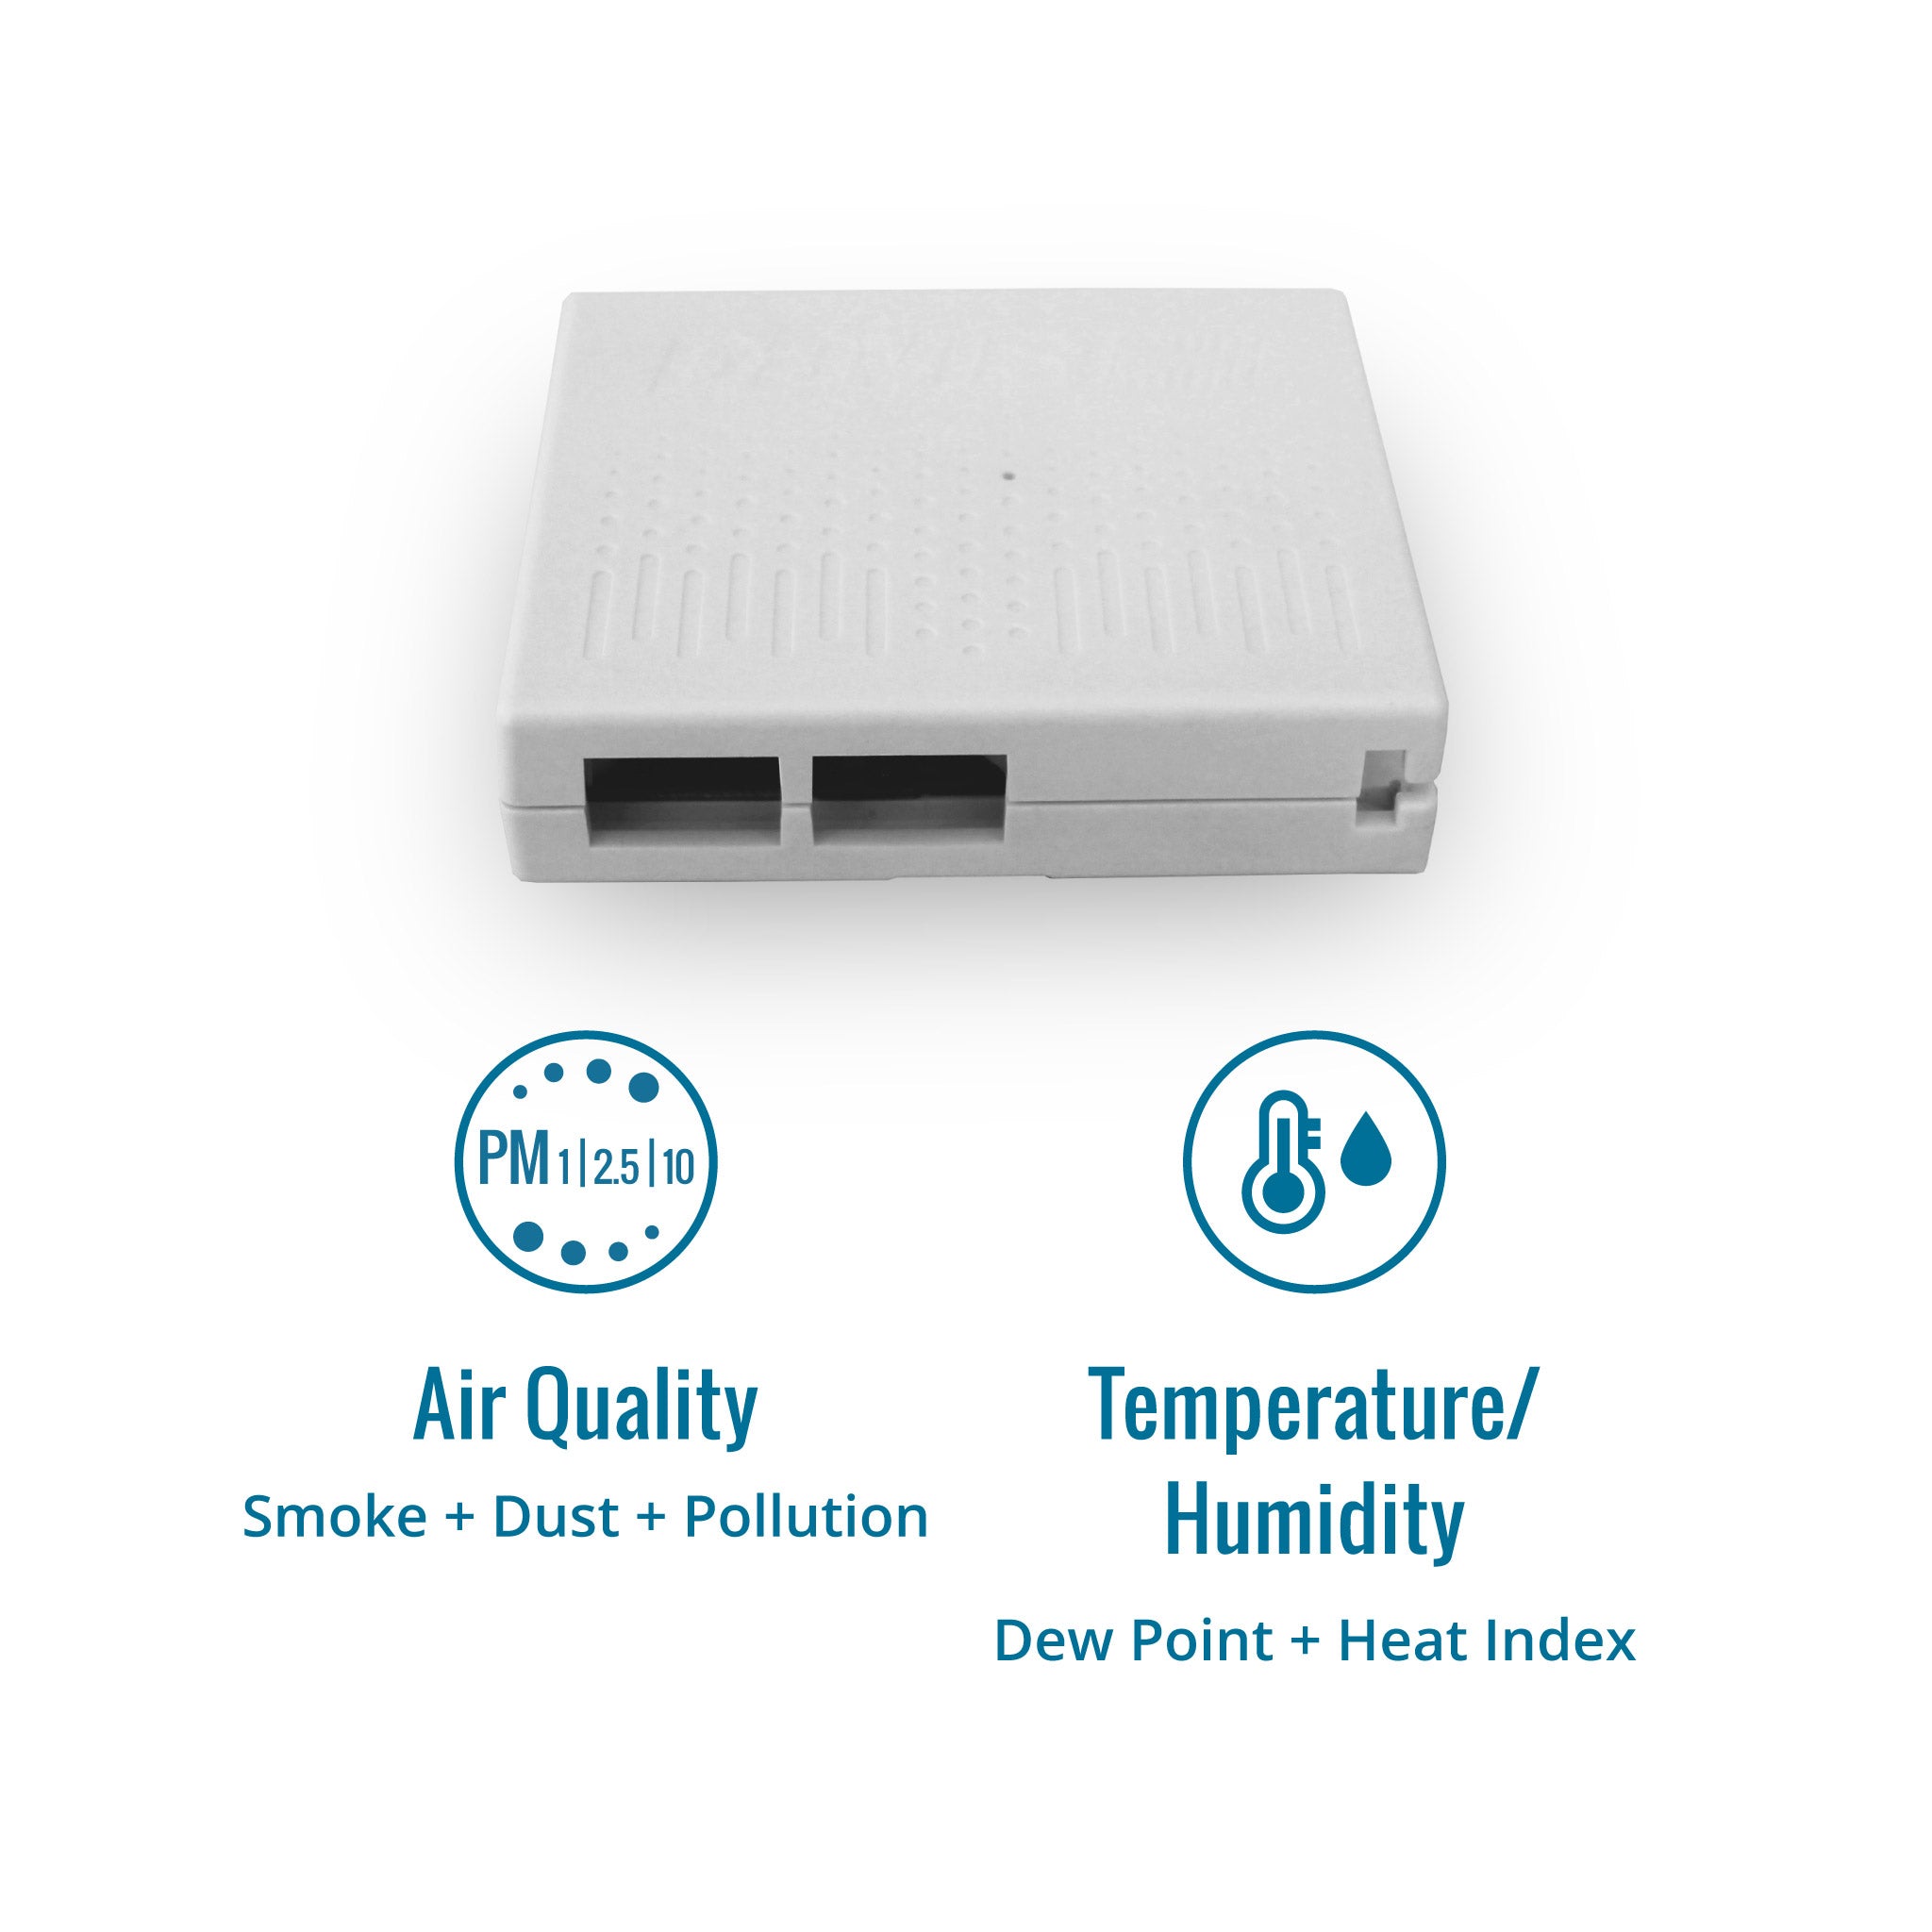 AirLink Air Quality Monitor  PM 1 | 2.5 | 10  smoke dust pollution | measures temperature humidity dew point heat index